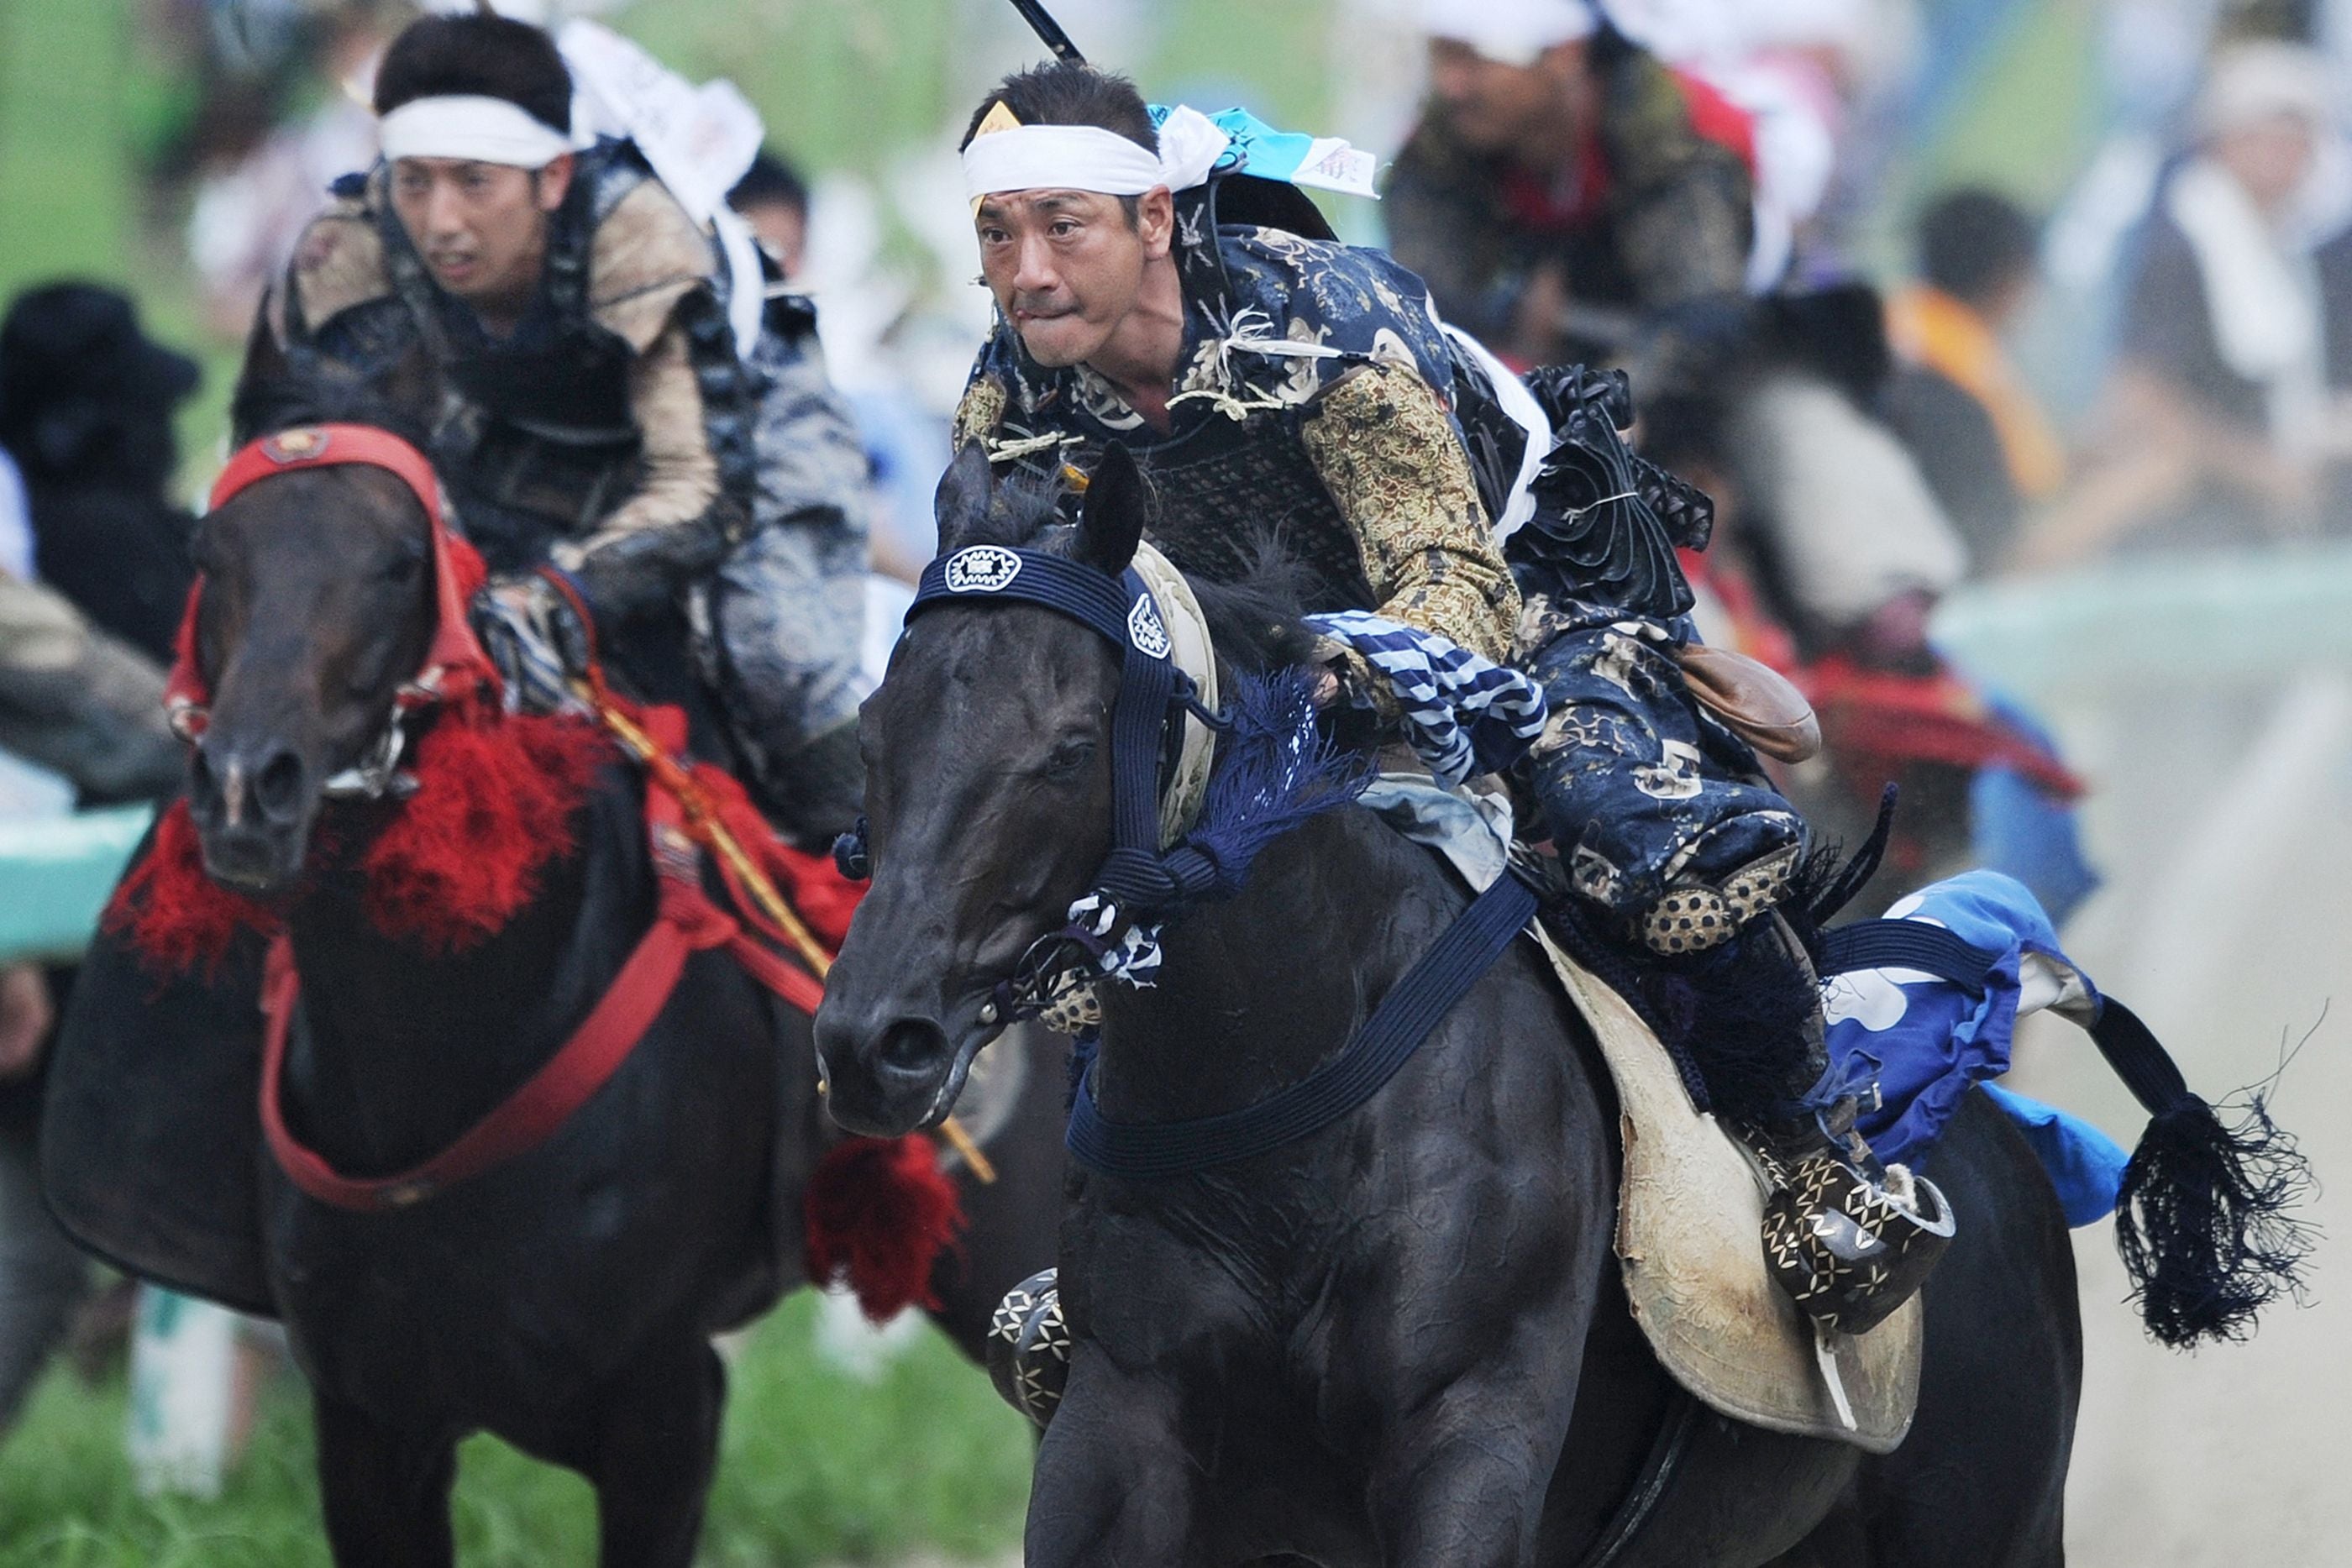 People wearing samurai armour race horses during the annual Soma Nomaoi Festival in Minamisoma, Fukushima prefecture on 29 July 2012